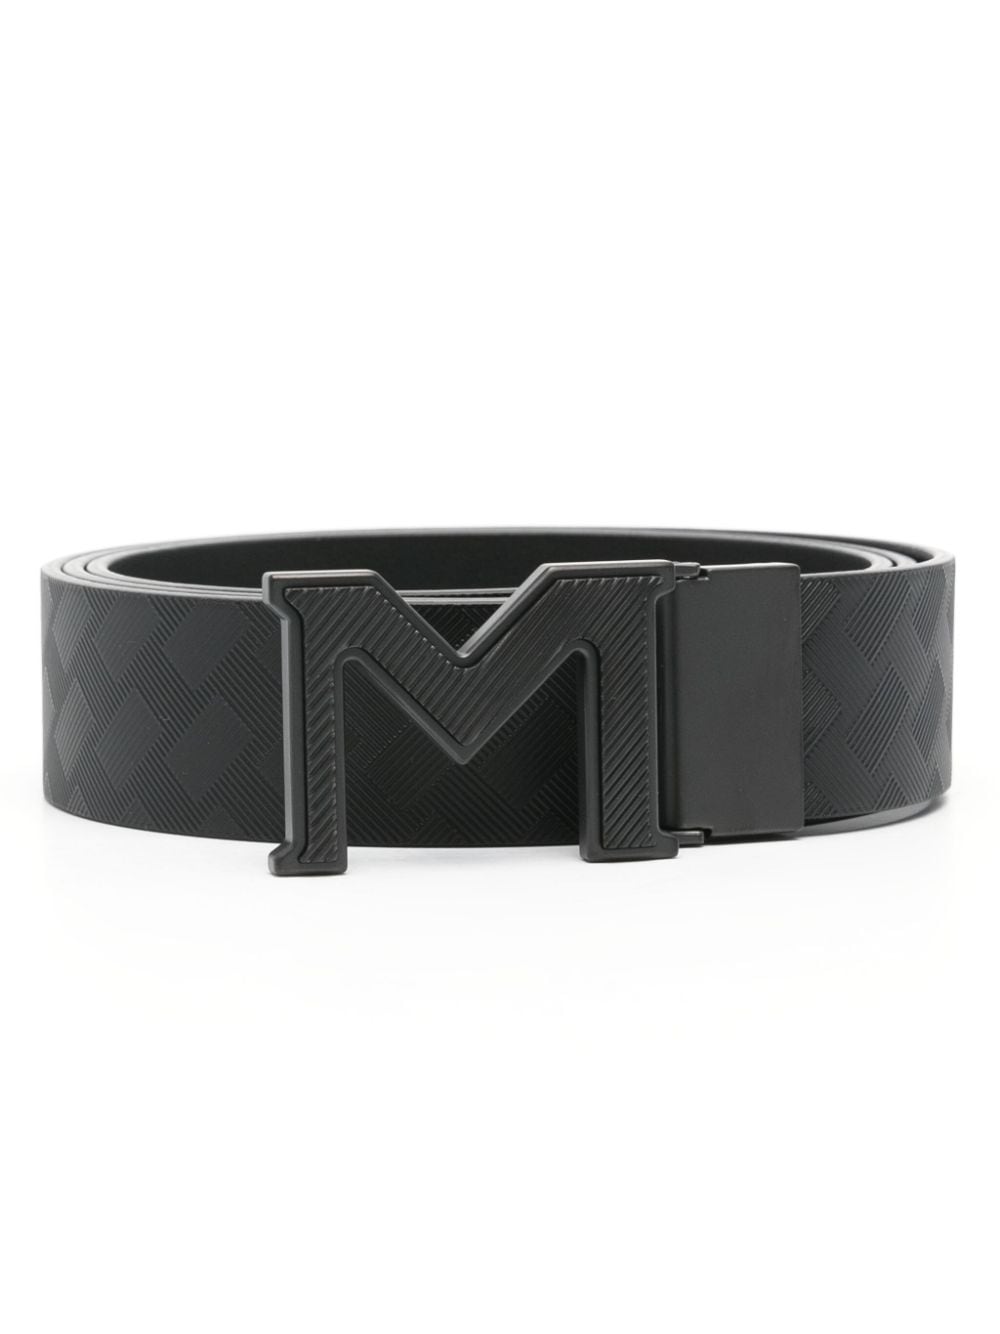 Montblanc M Buckle Extreme 3.0 Leather Belt In Black